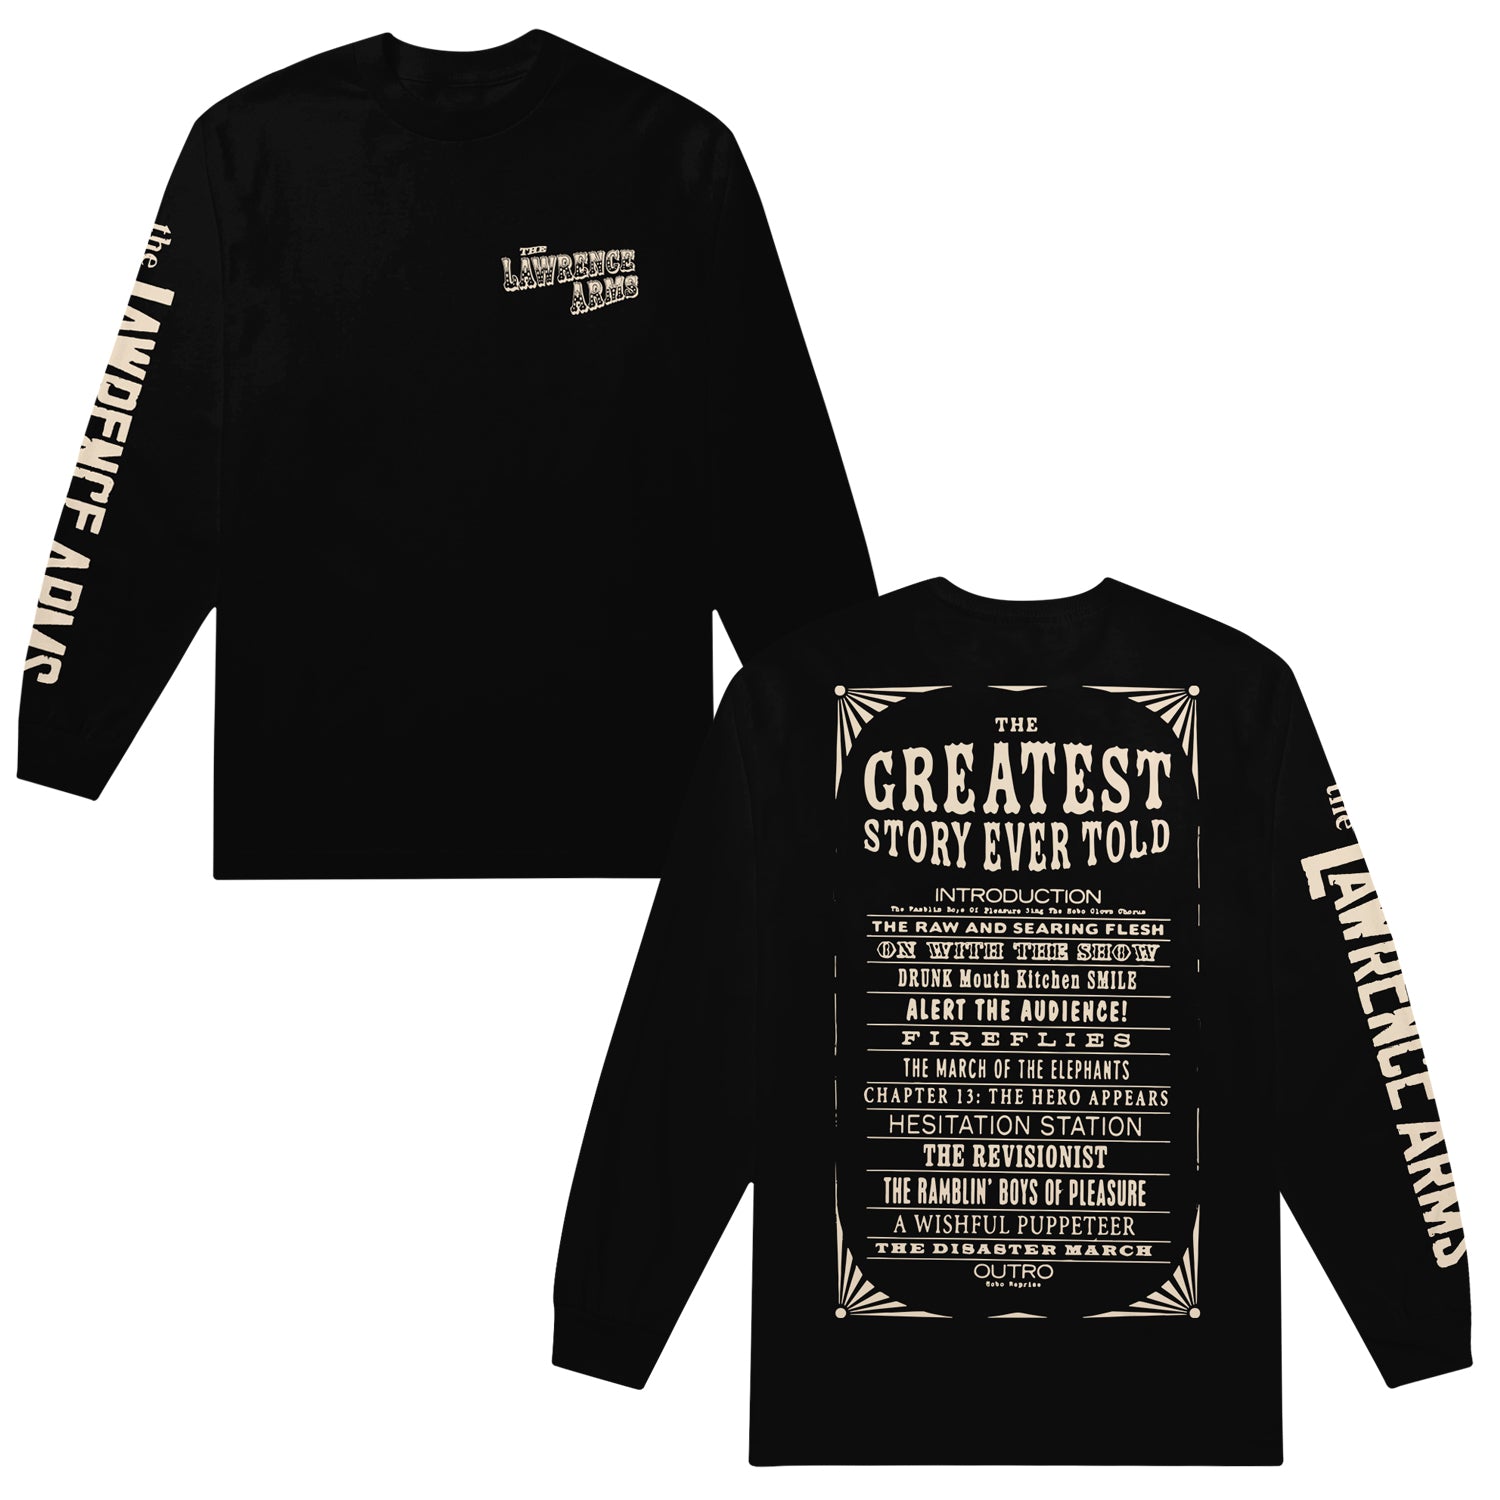 Image of the front and back of a black longsleeve against a white background. The left chest of the front of the longsleeve says the lawrence arms. The right sleeve also says this. Both are in white. The back of the shirt sort of looks like a rectangular circus flyer, it says the greatest story ever told. Below that it lists the tracklist for the album.  